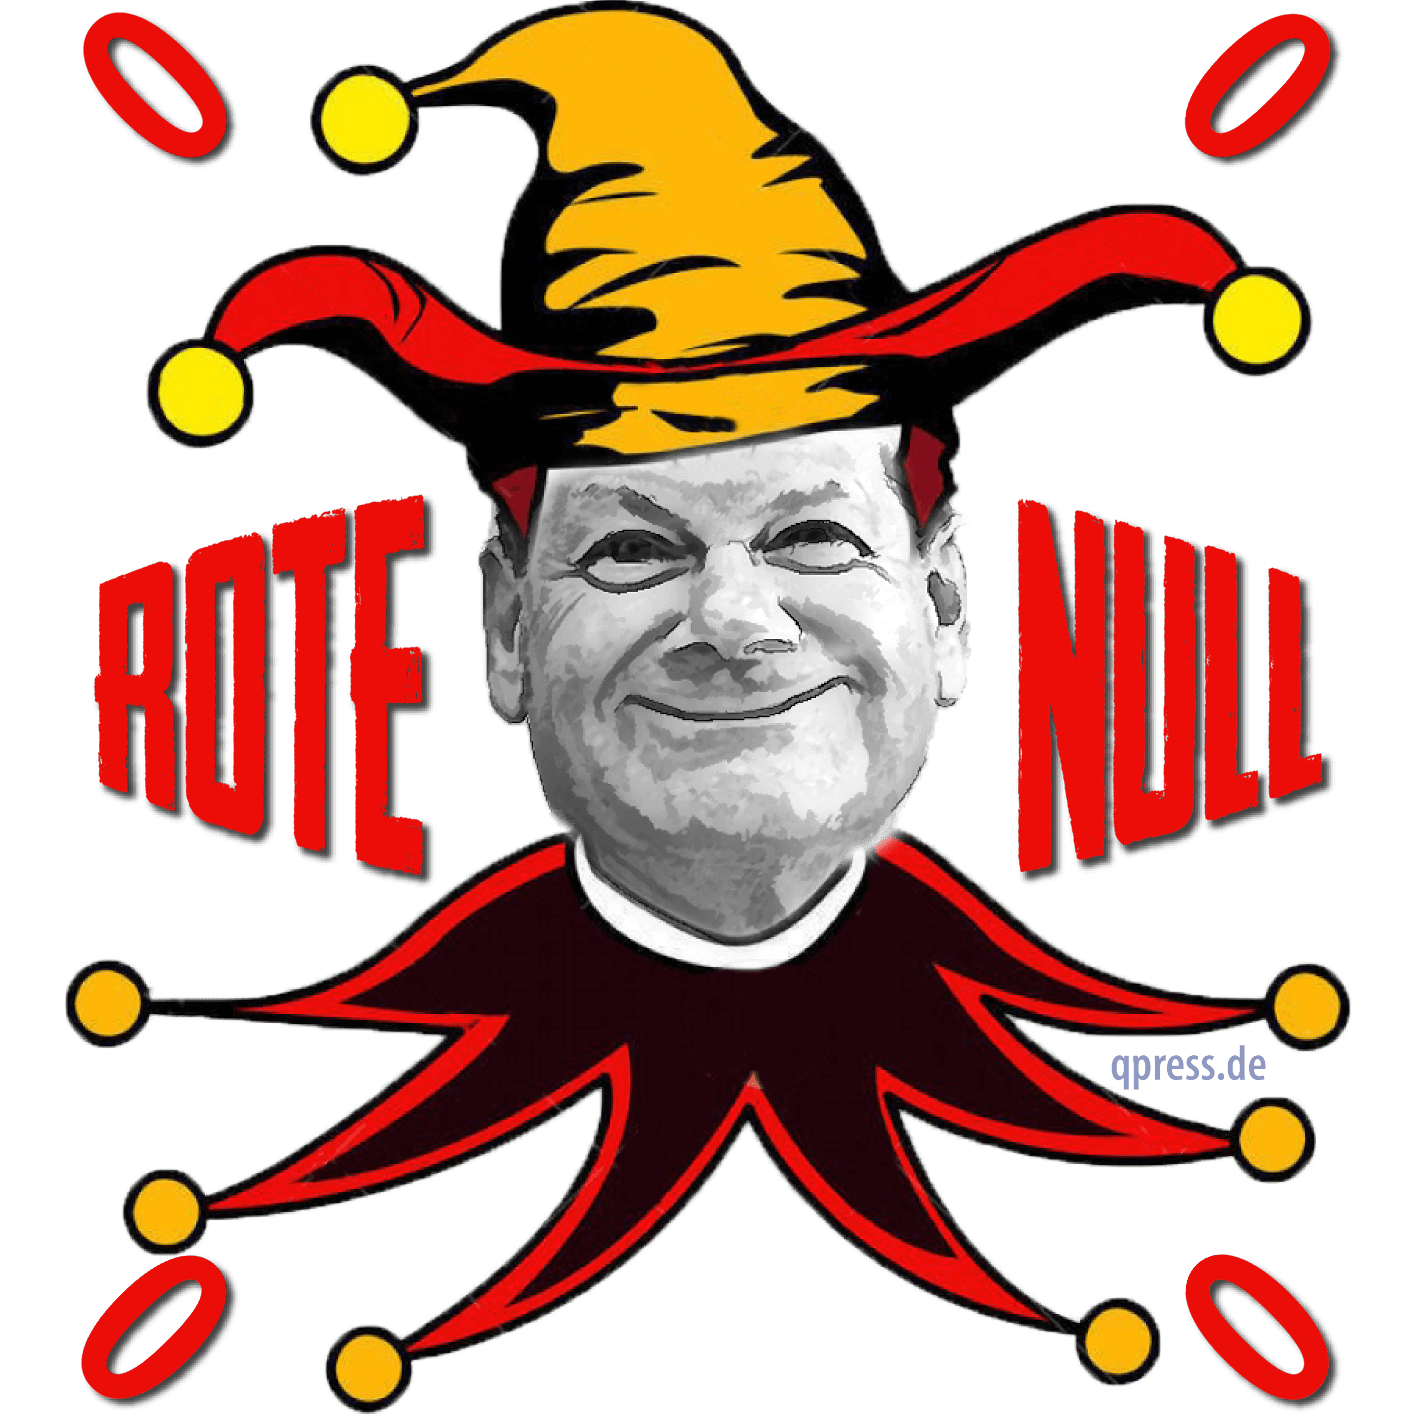 Olaf Scholz Joker face rote Null